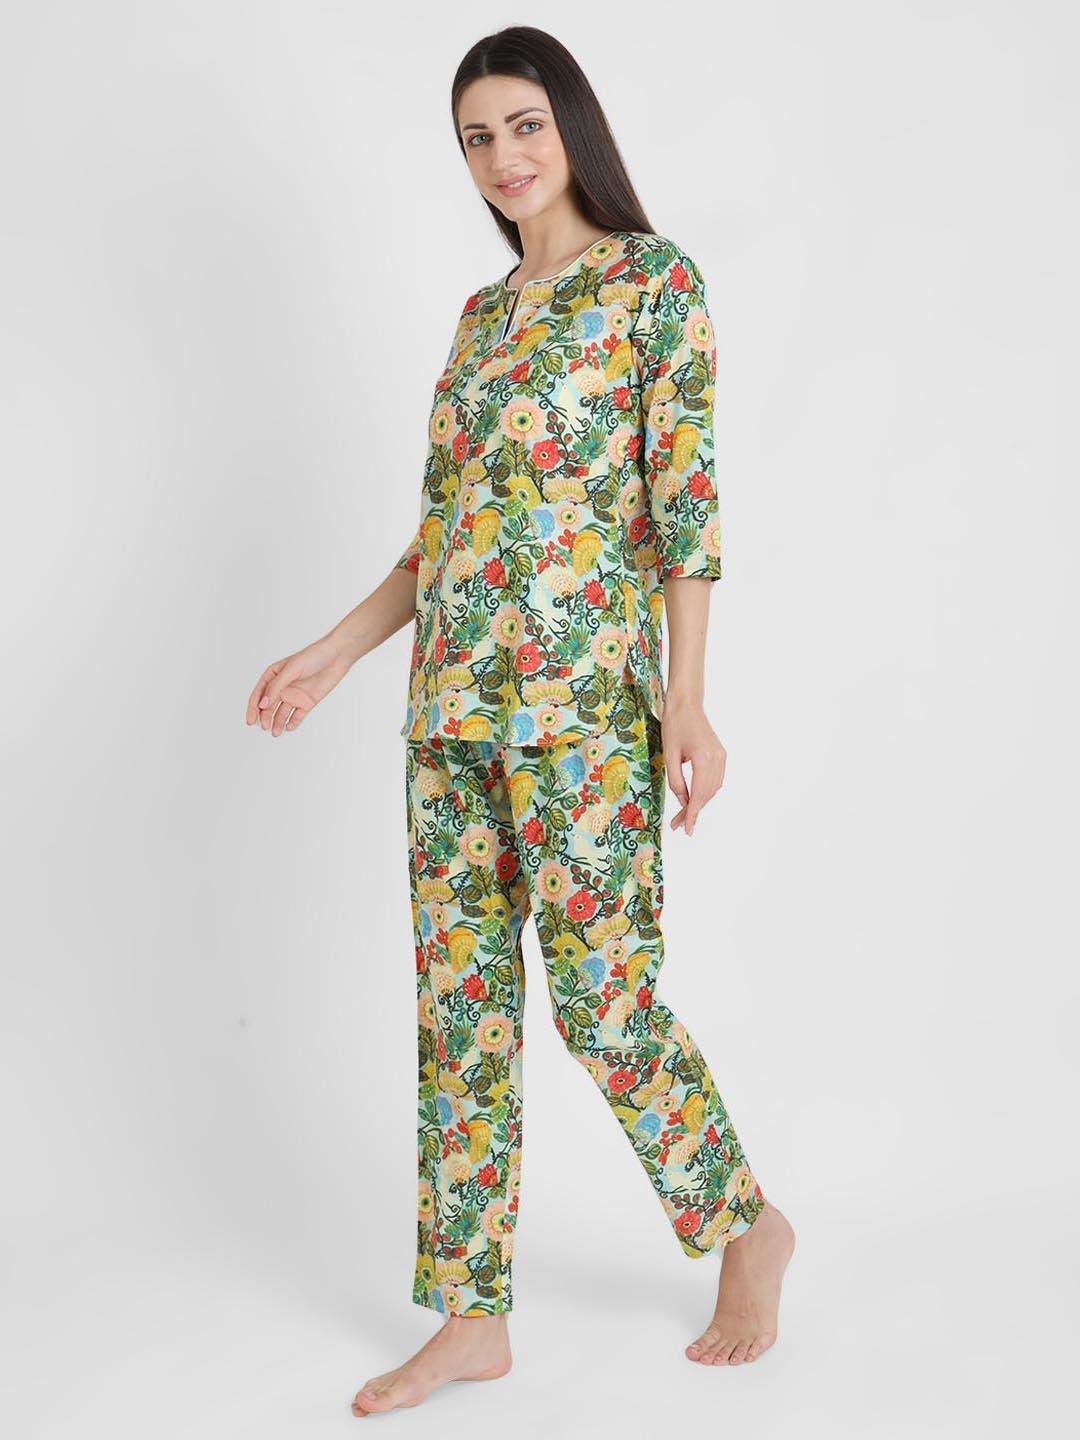 Wild Floral Printed Nightsuit Set for Women